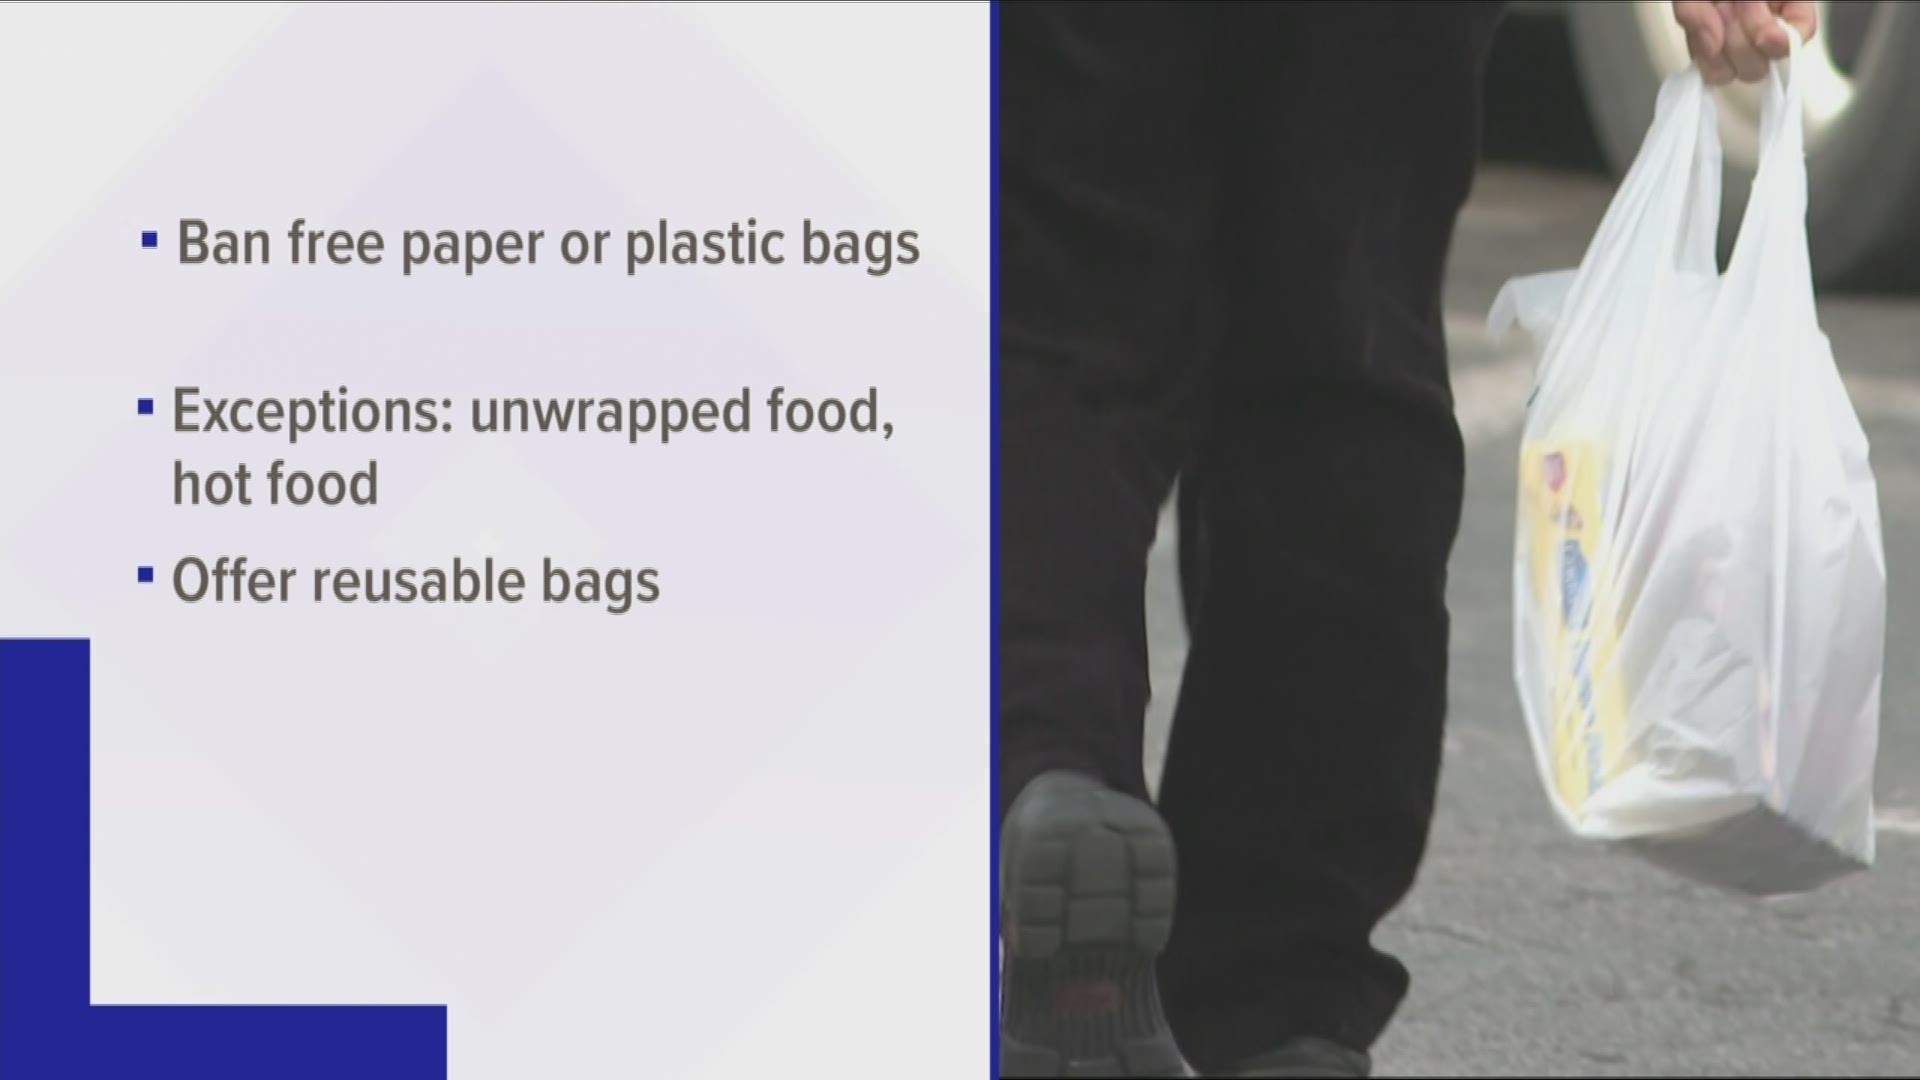 State lawmakers want to ban one-time use bags at grocery stores.